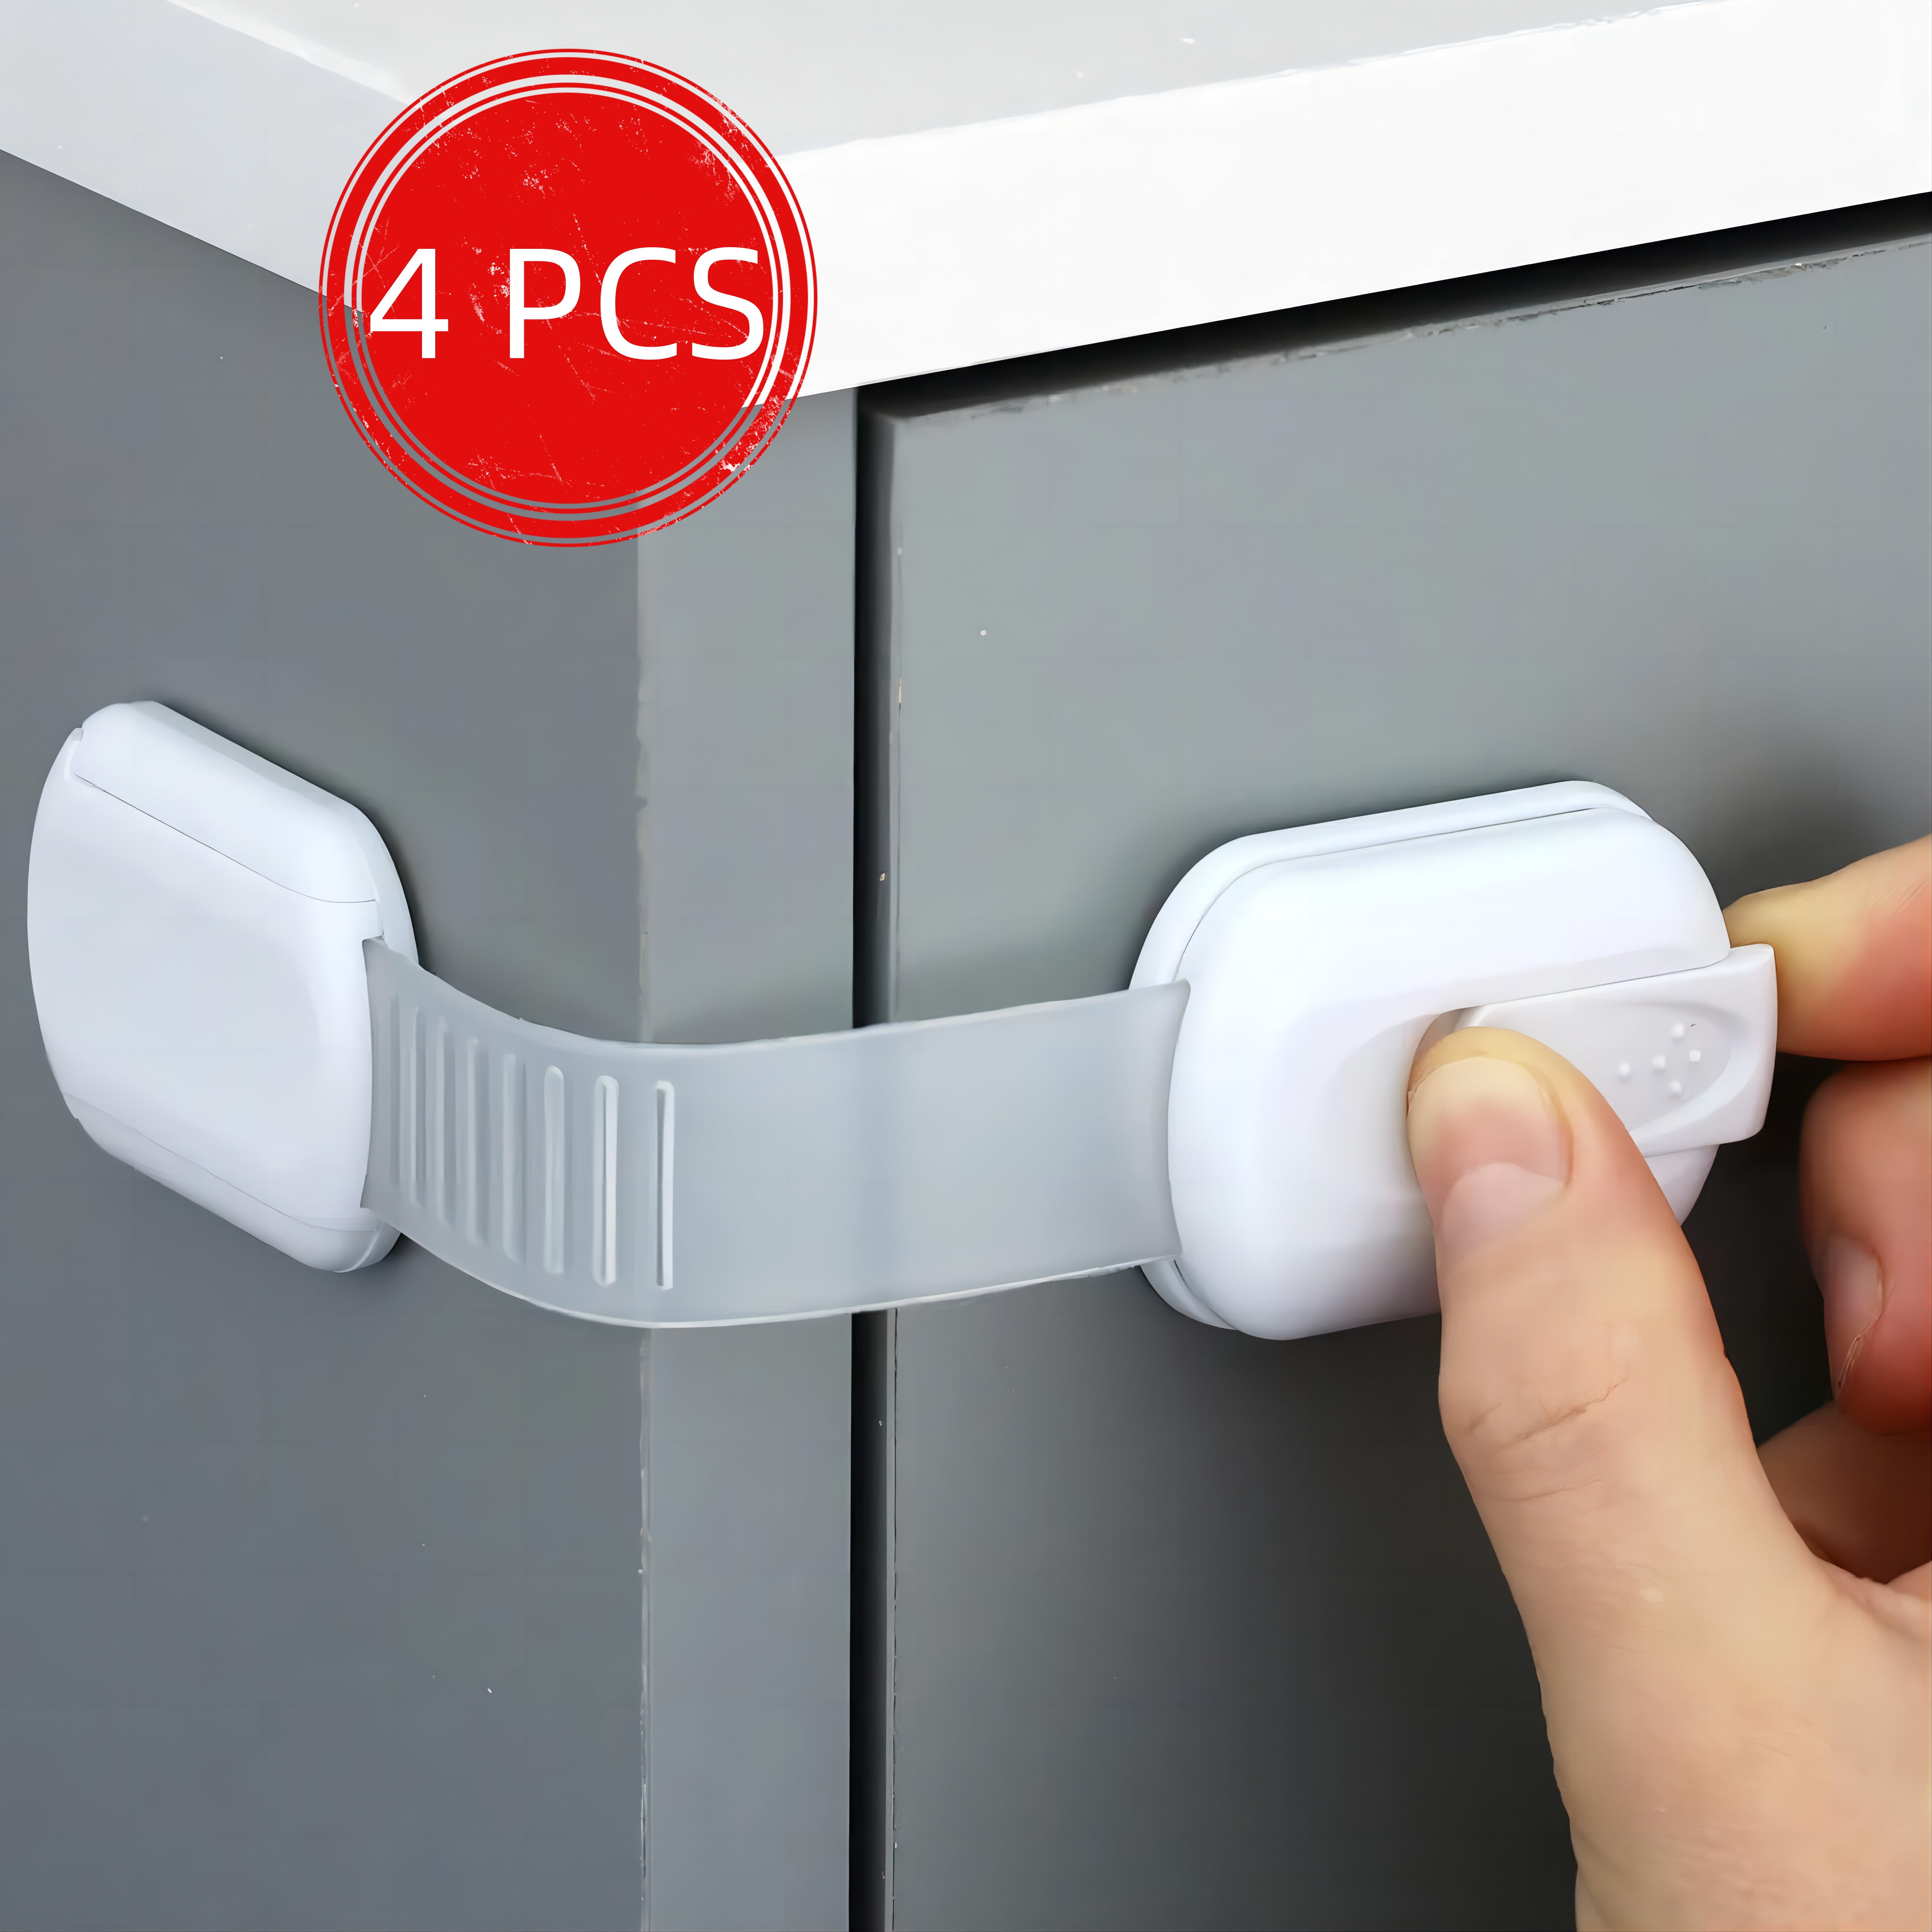 Mittory 4pcs Invisible Baby Safety Magnetic Cabinet Lock Child